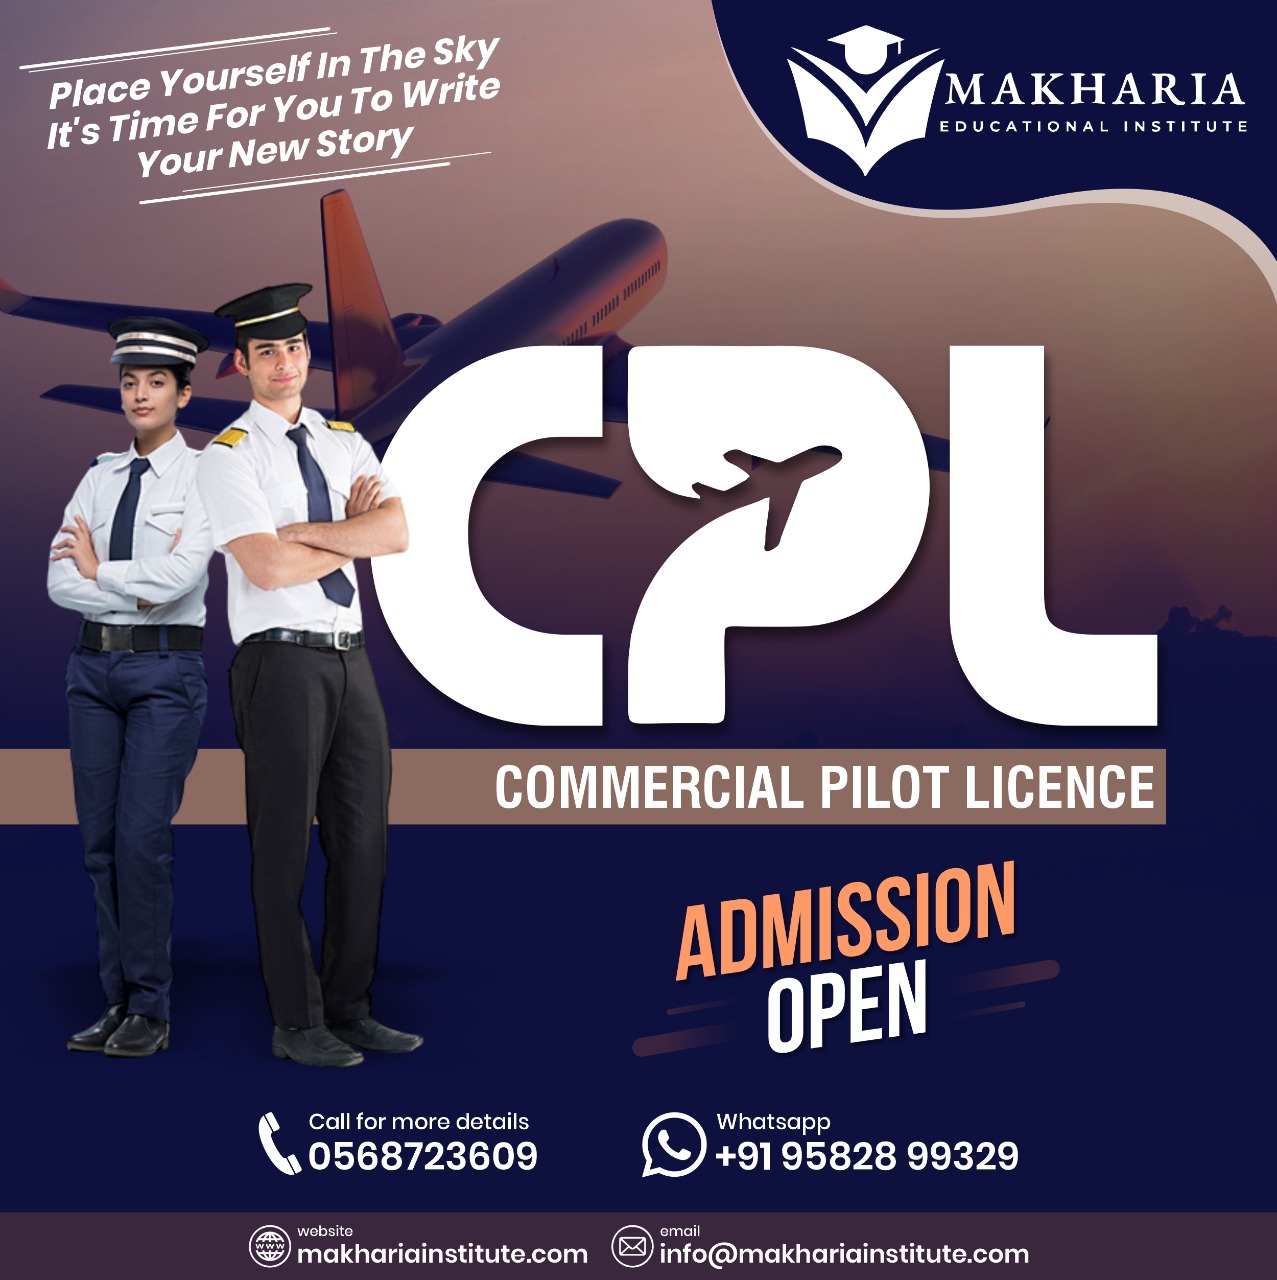 CPL ( Commercial Pilot License ) At Makharia C – 0568723609